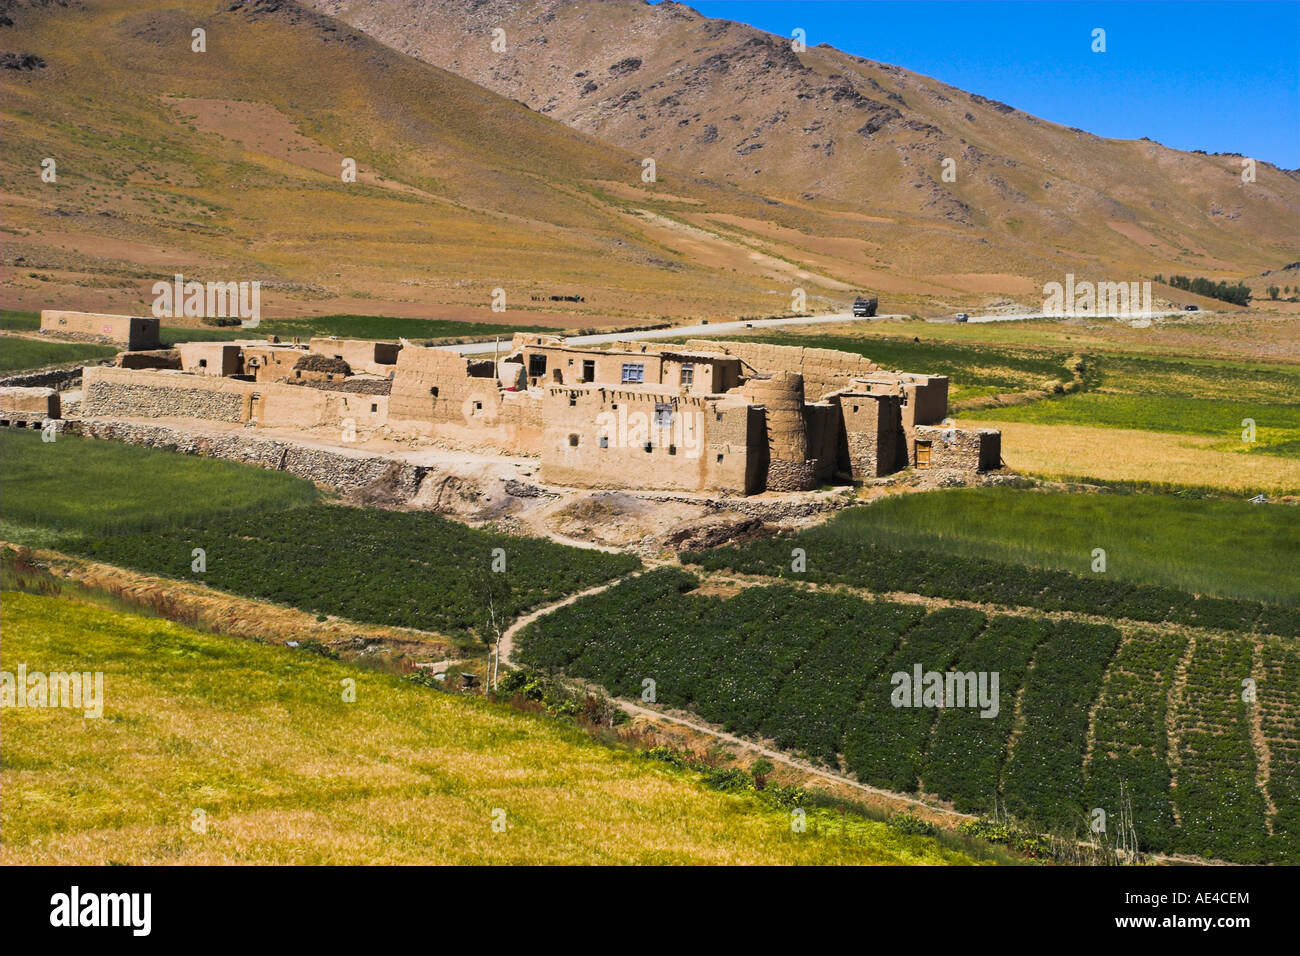 Farmhouse on the southern route between Kabul and Bamiyan, Afghanistan, Asia Stock Photo